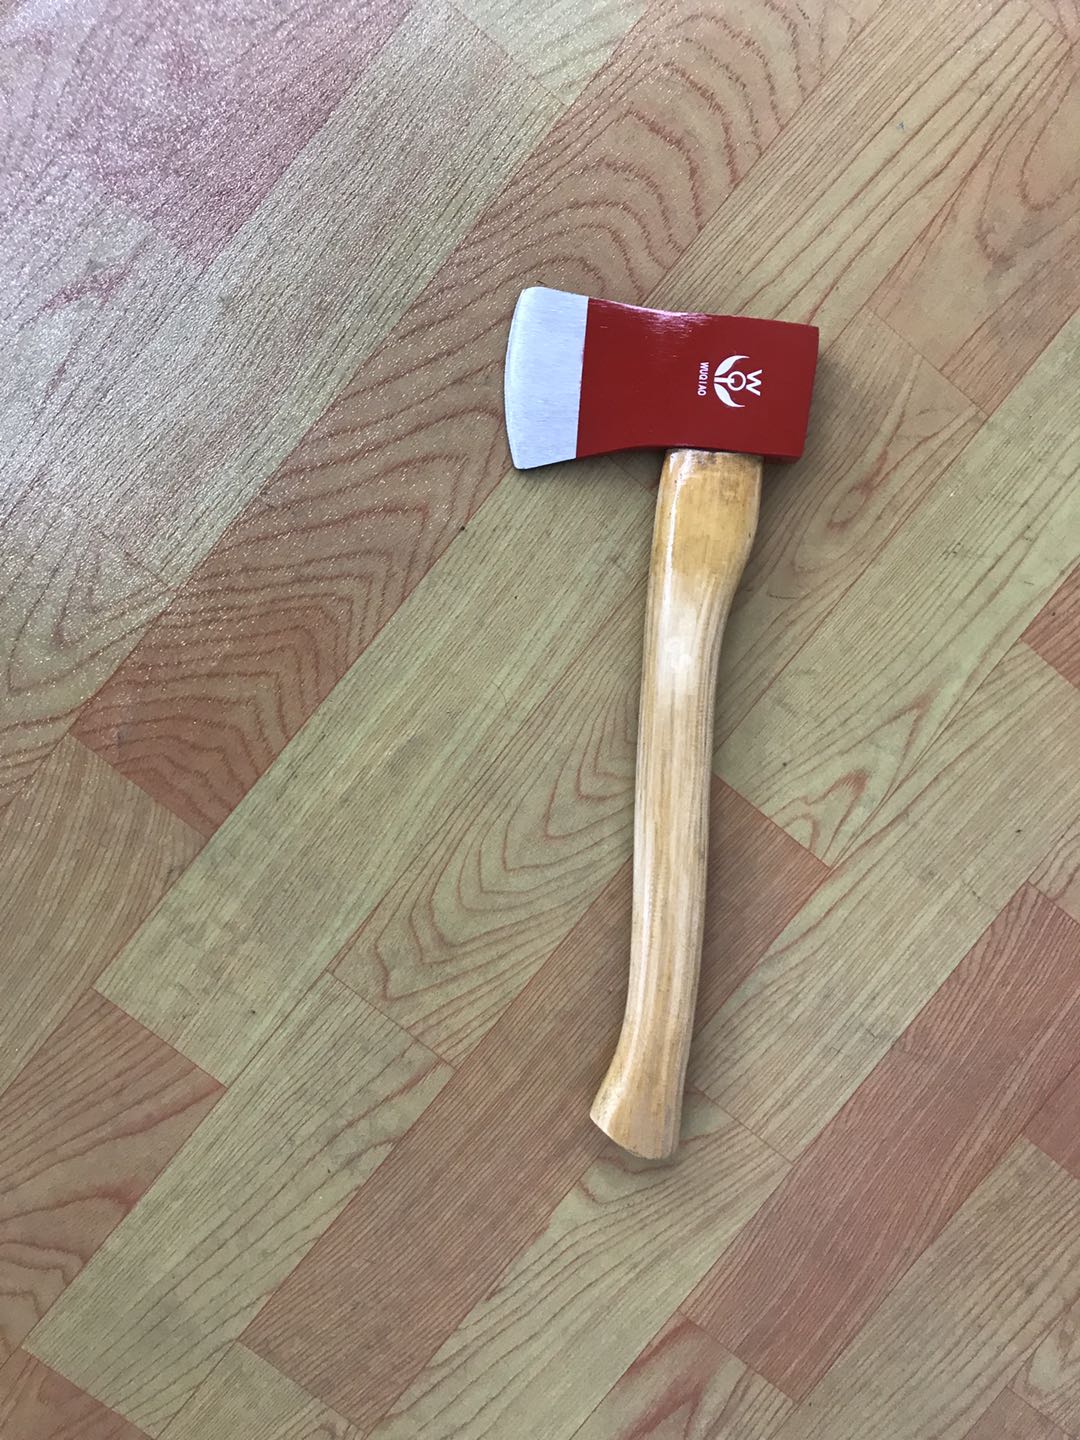 axe with handle